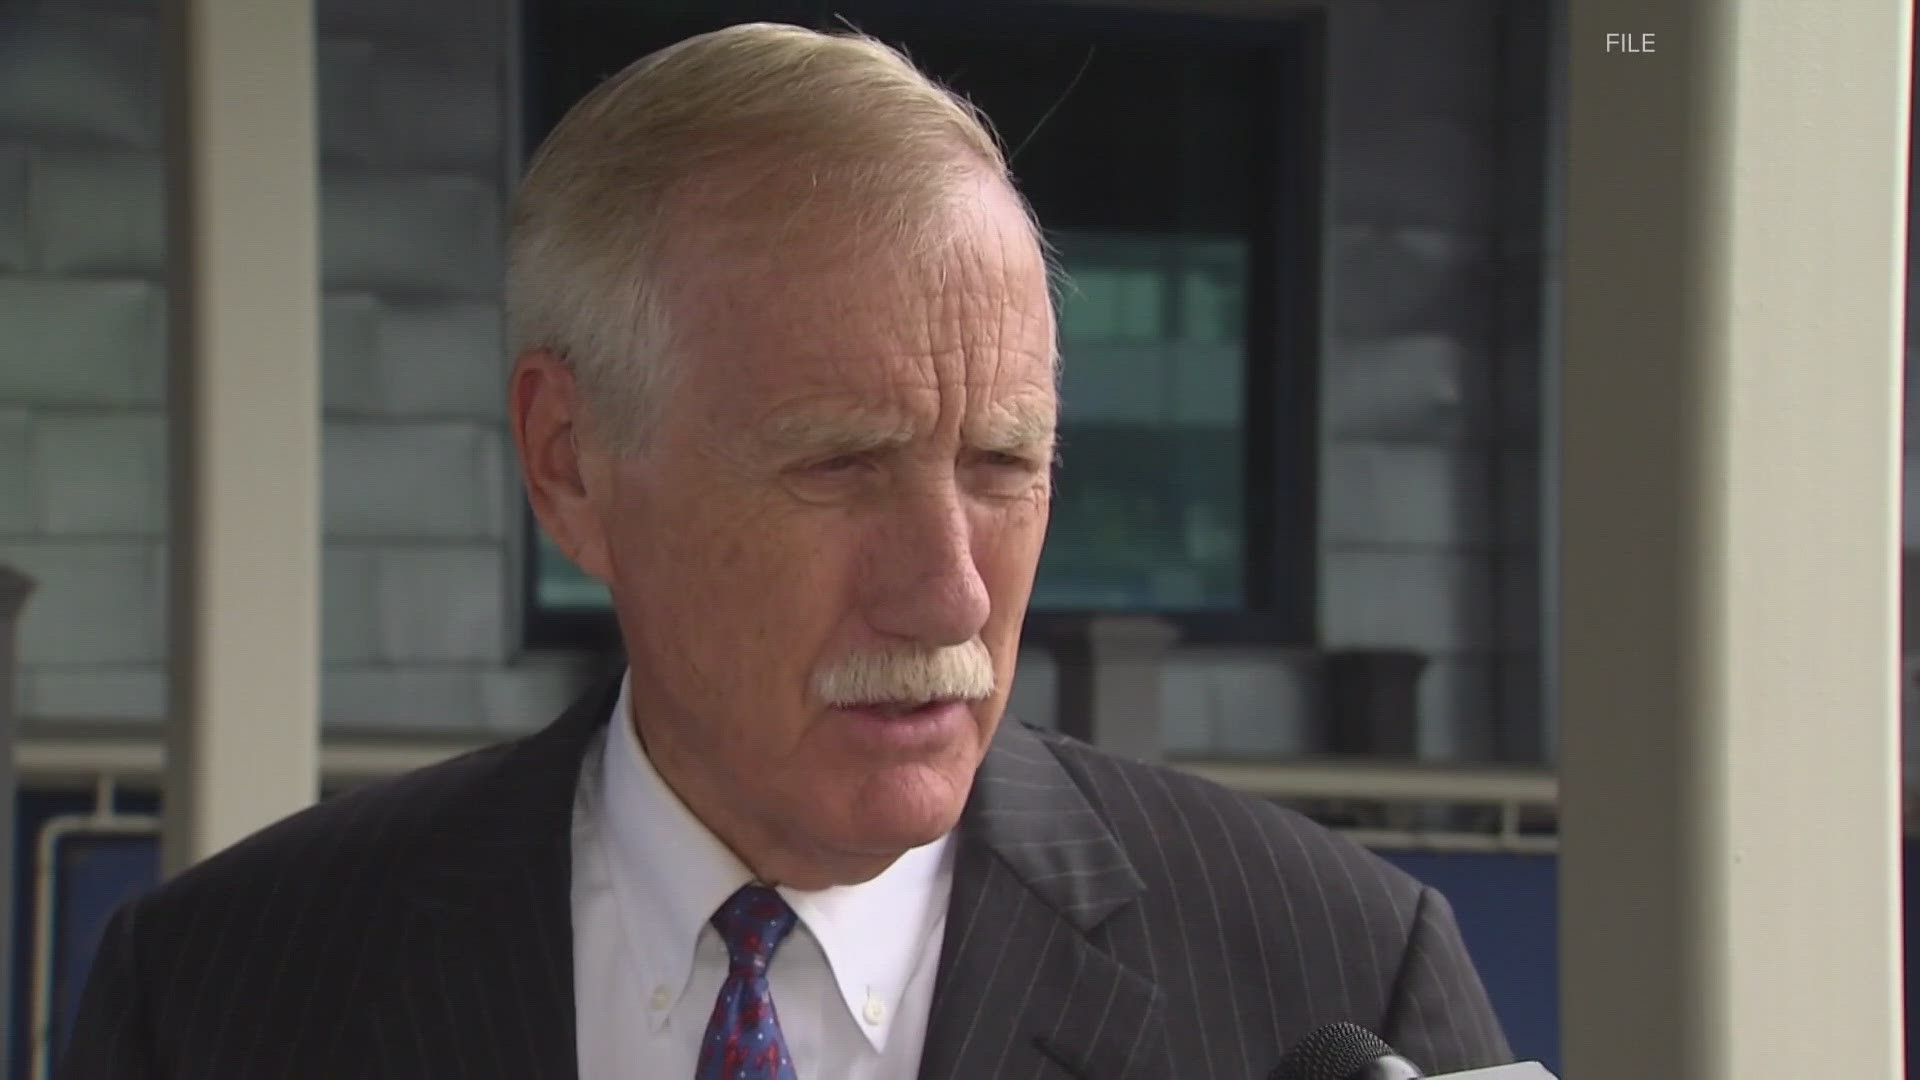 Senator Angus King said the proposed two-year, 20-member China Grand Strategy Commission would develop a comprehensive plan for U.S. federal departments.